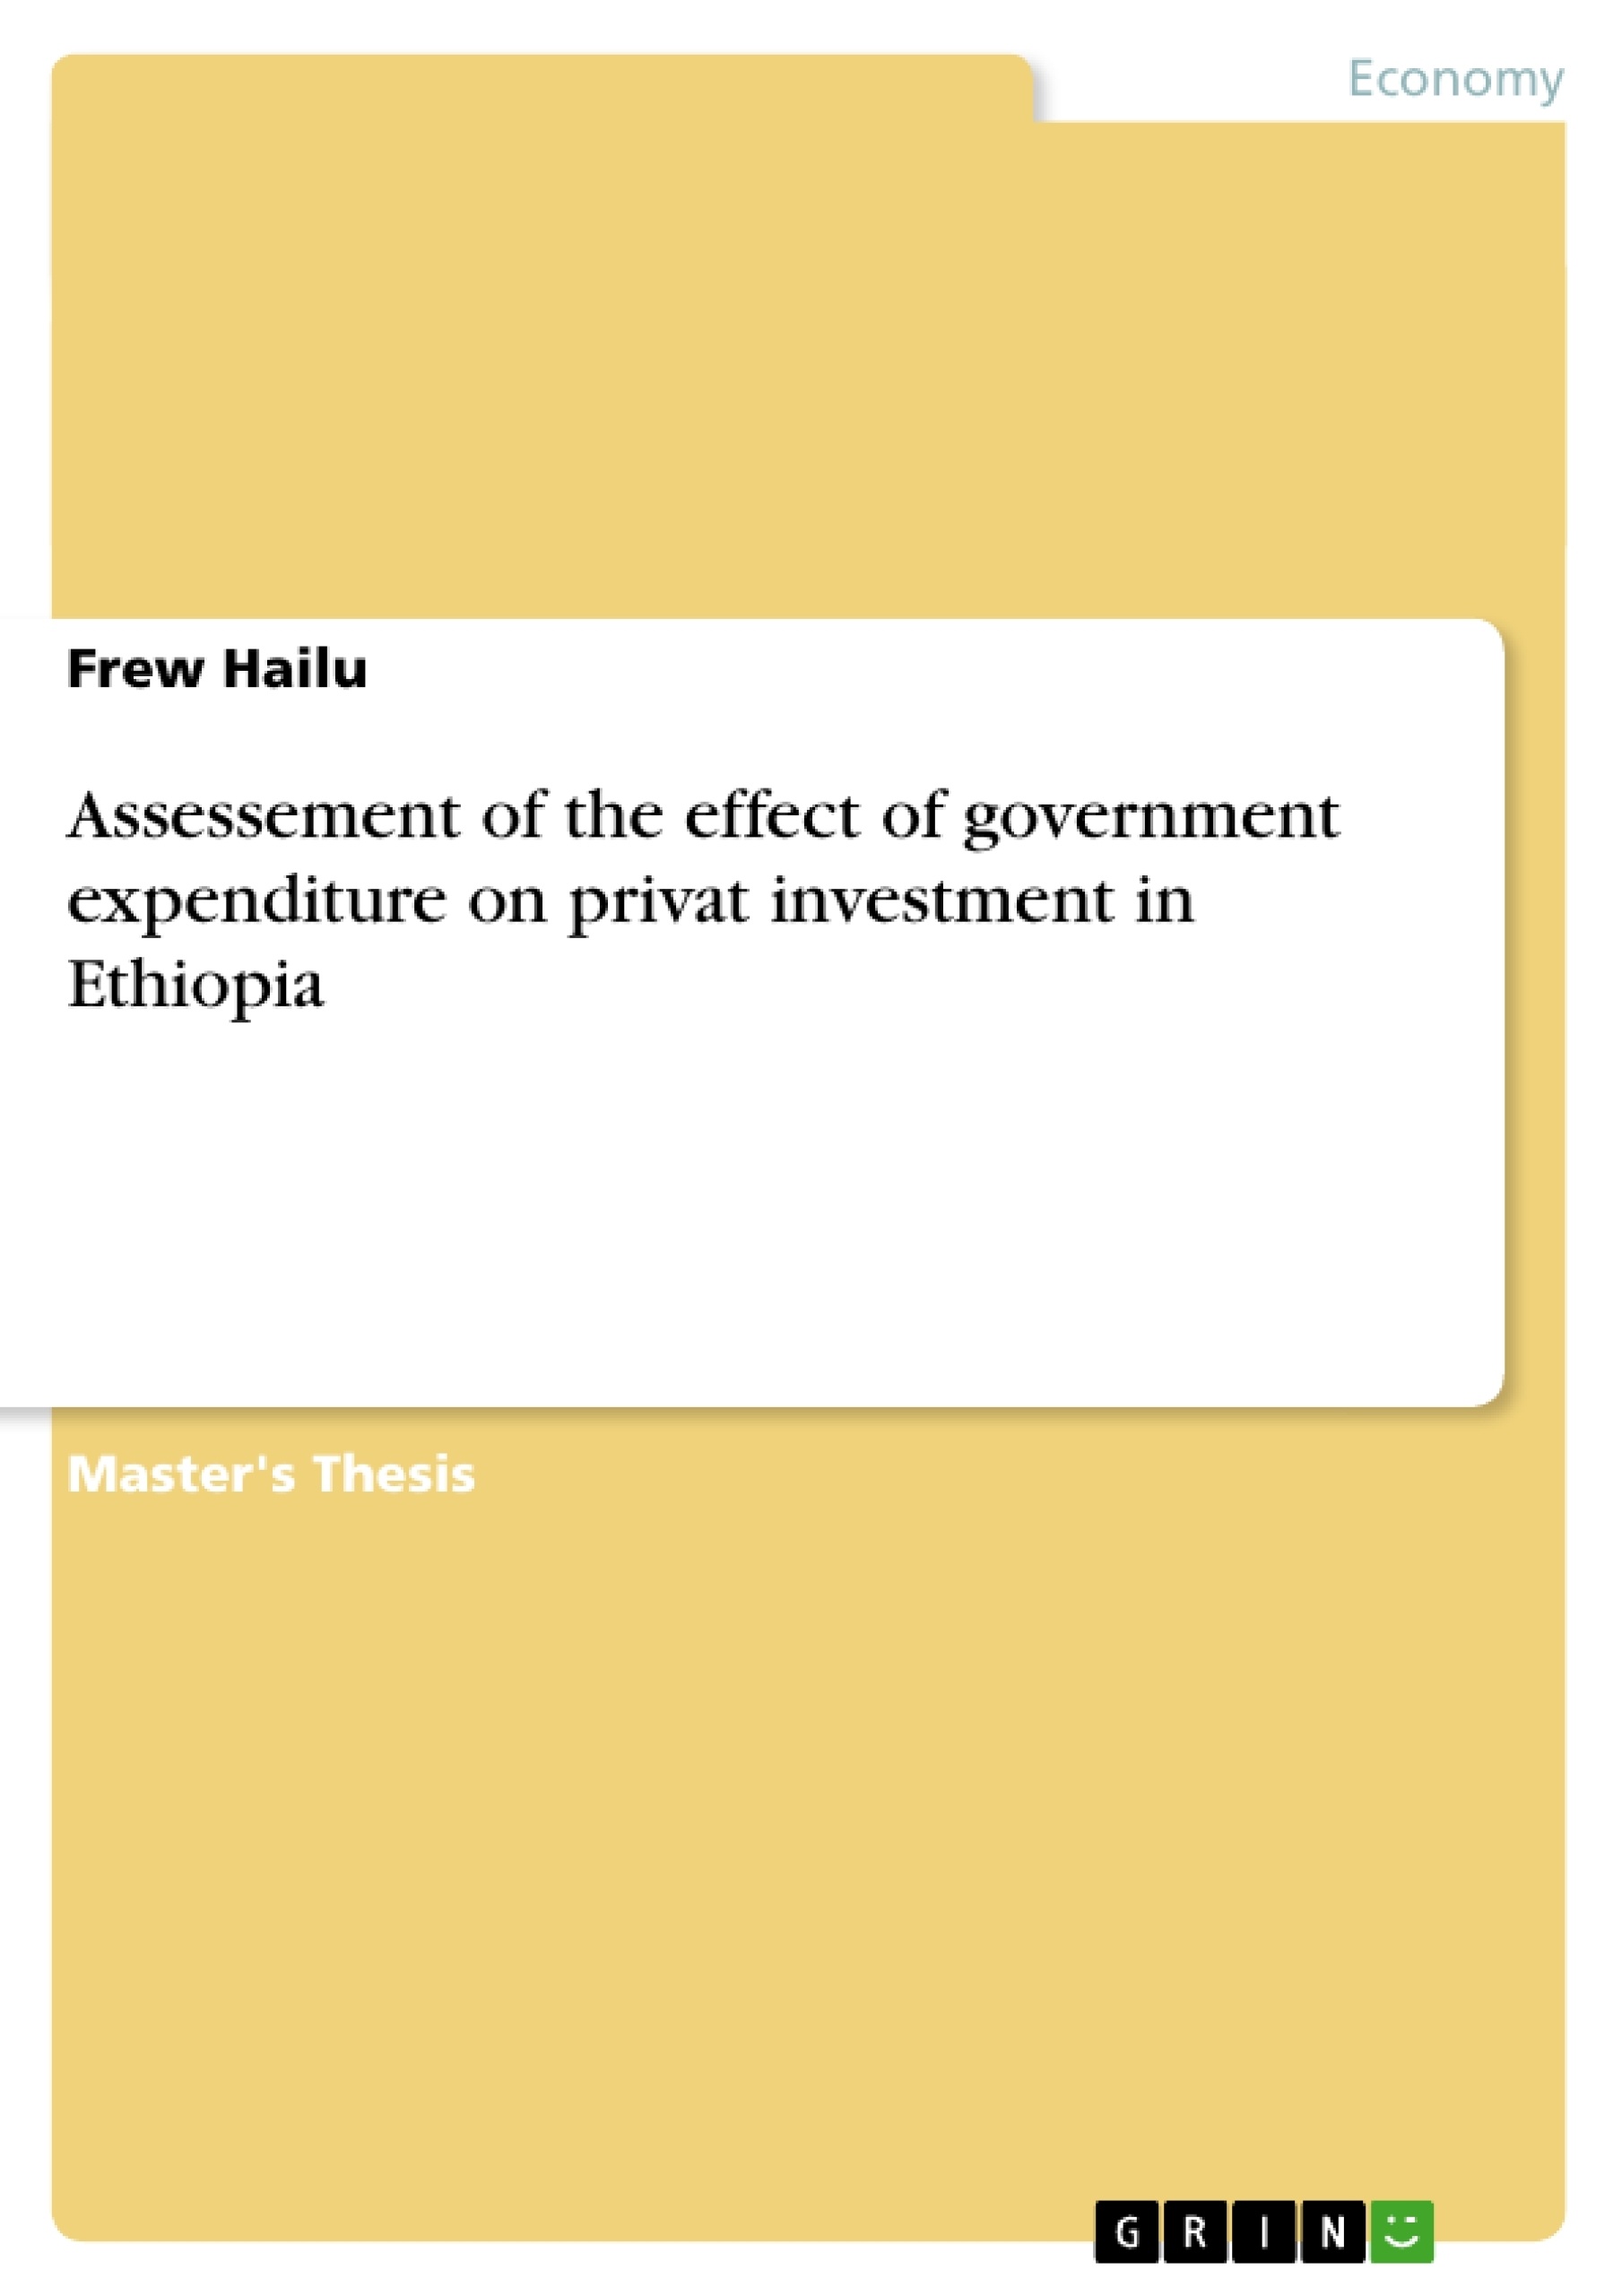 Title: Assessement of the effect of government expenditure on privat investment in Ethiopia